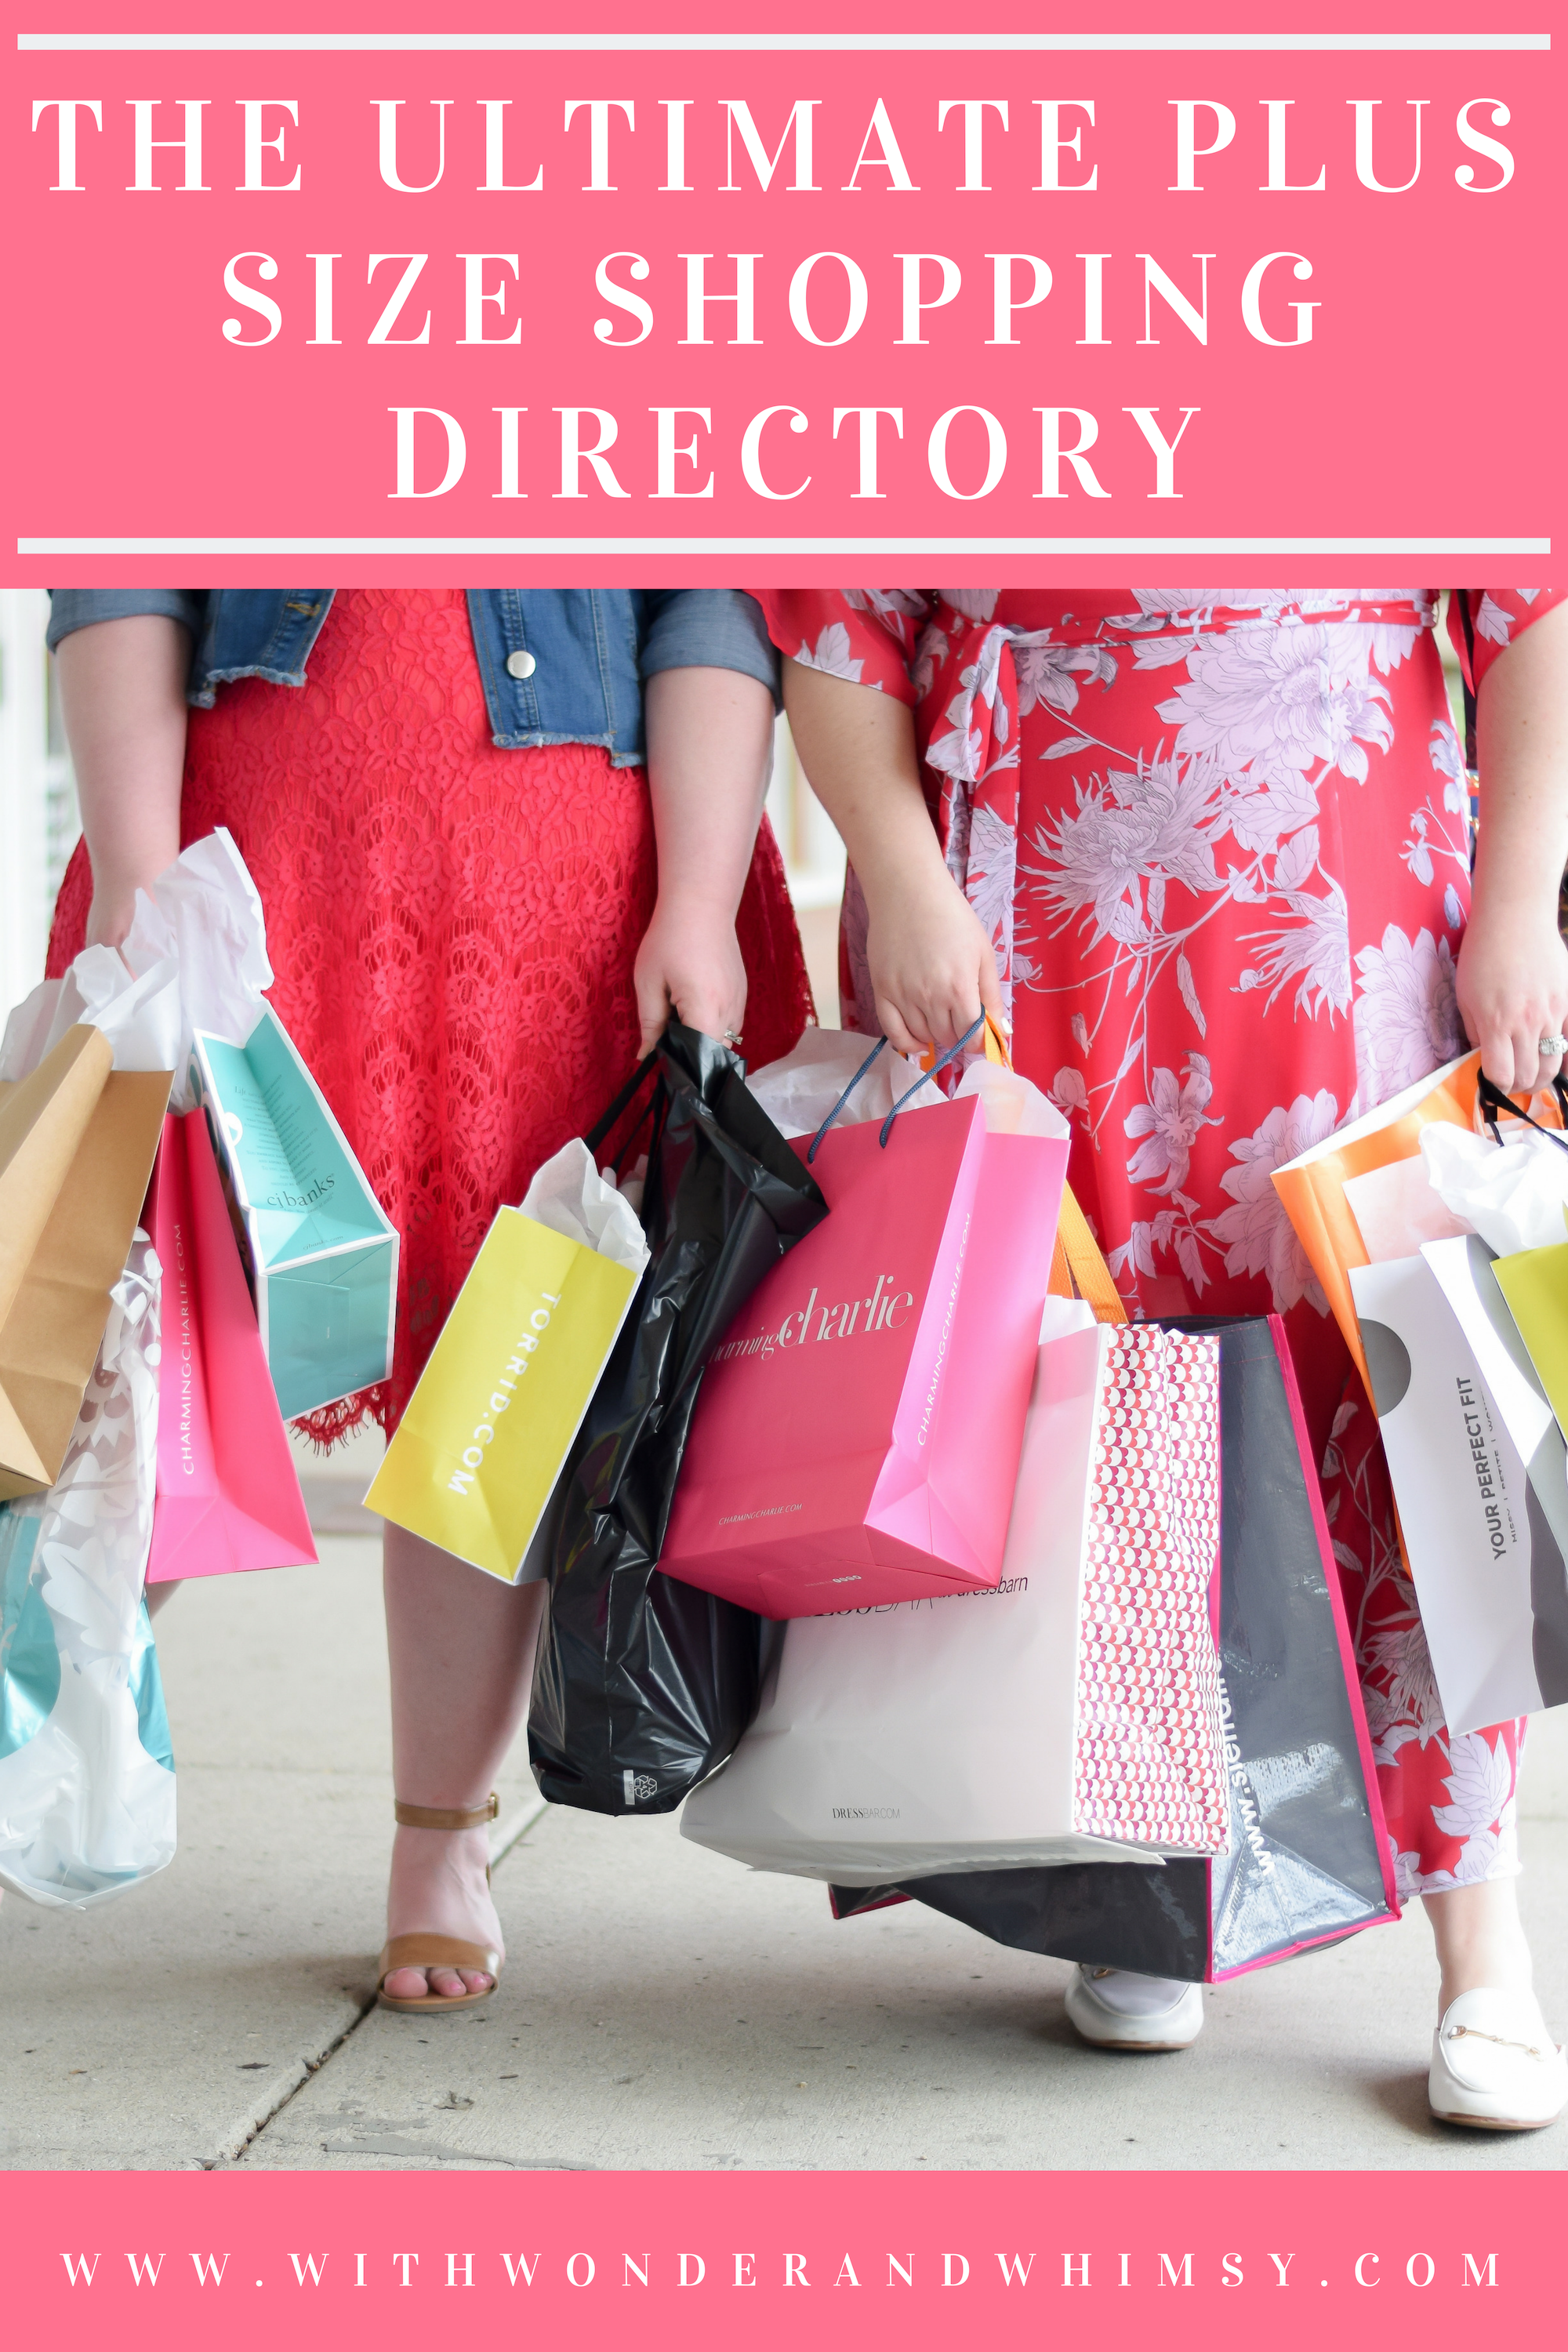 The Ultimate Plus Size Shopping Directory - With Wonder and Whimsy